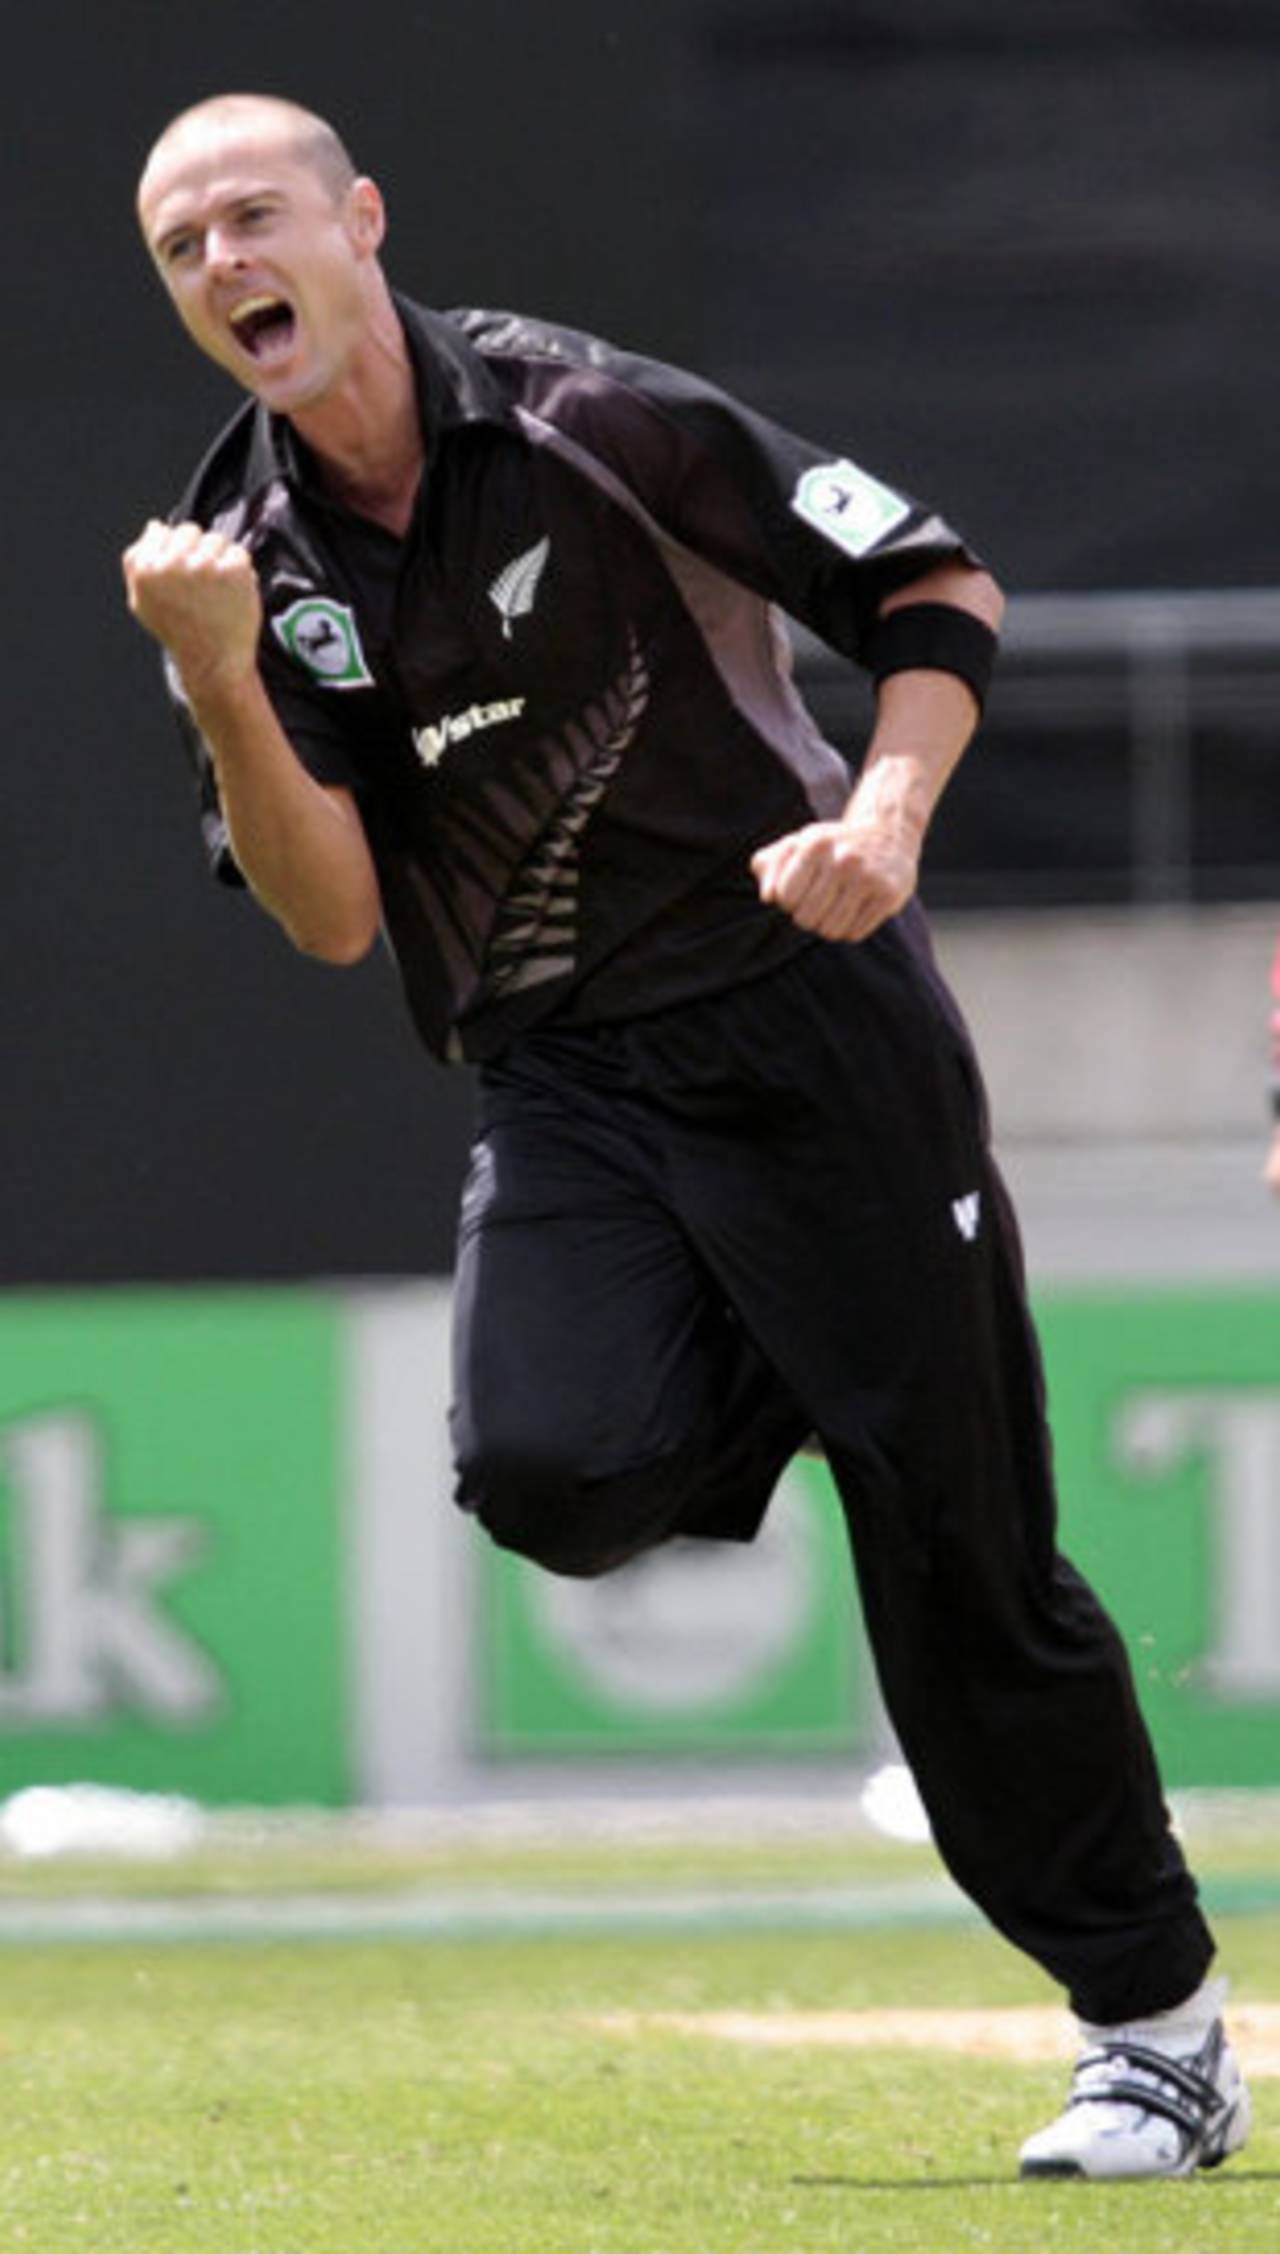 Chris Martin punches the air after dismissing Alastair Cook, New Zealand v England, 1st ODI, Wellington, February 9, 2008